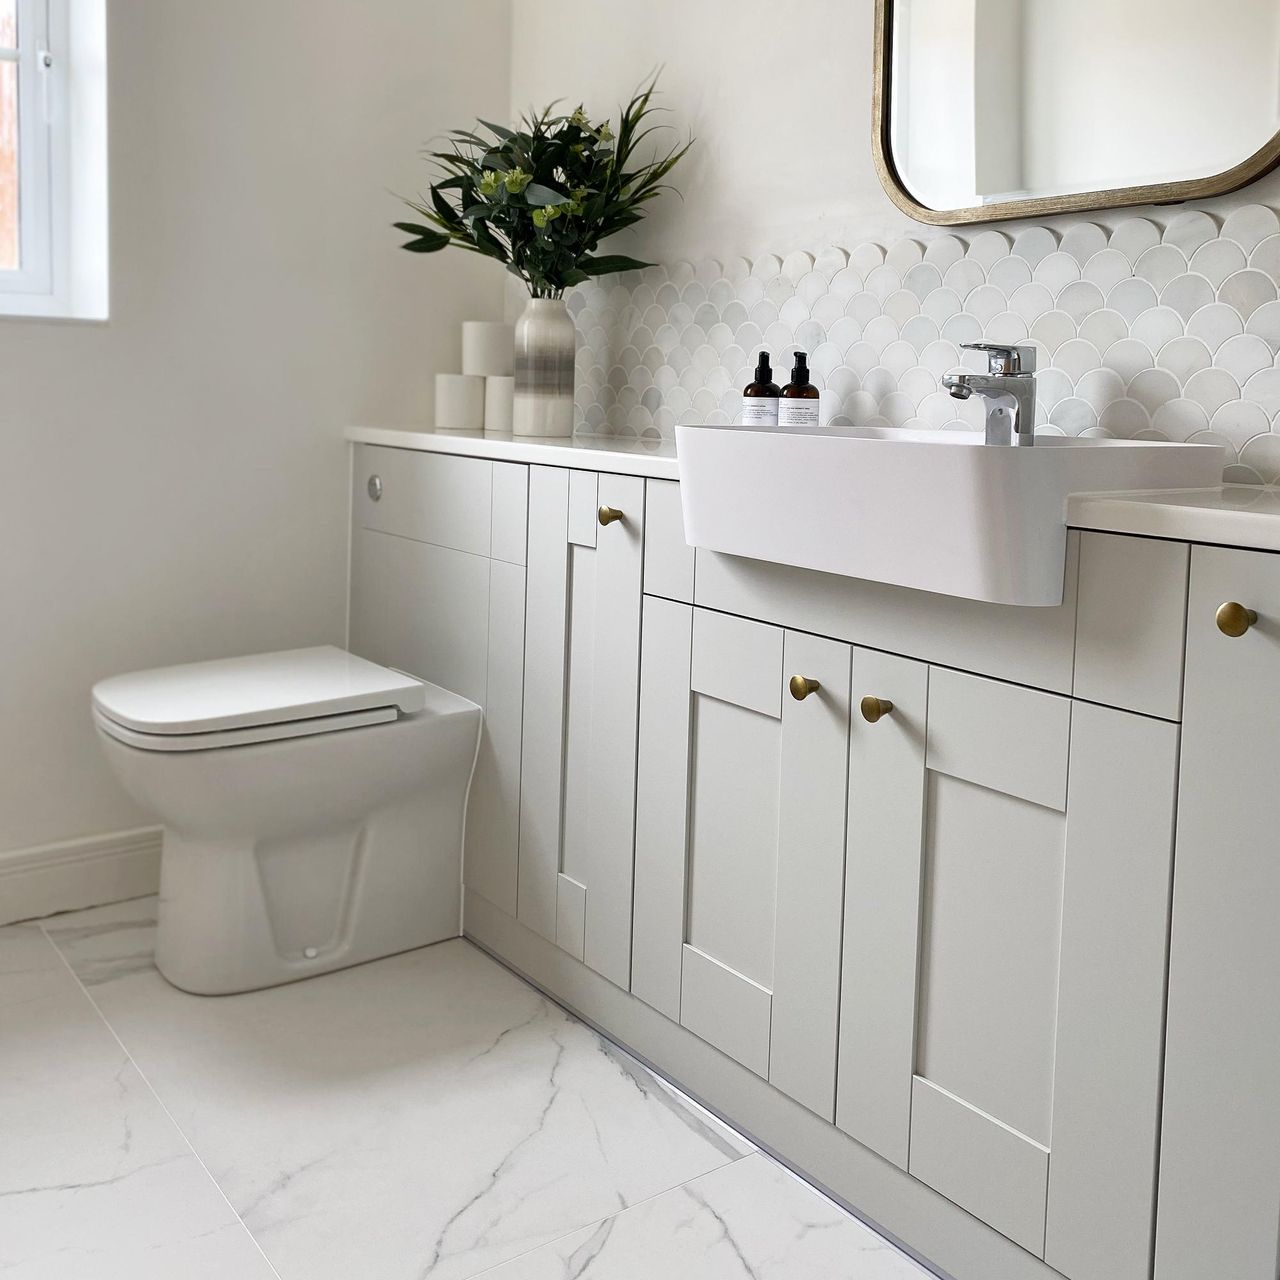 This ensuite is proof that a small space can be big on style | Ideal Home